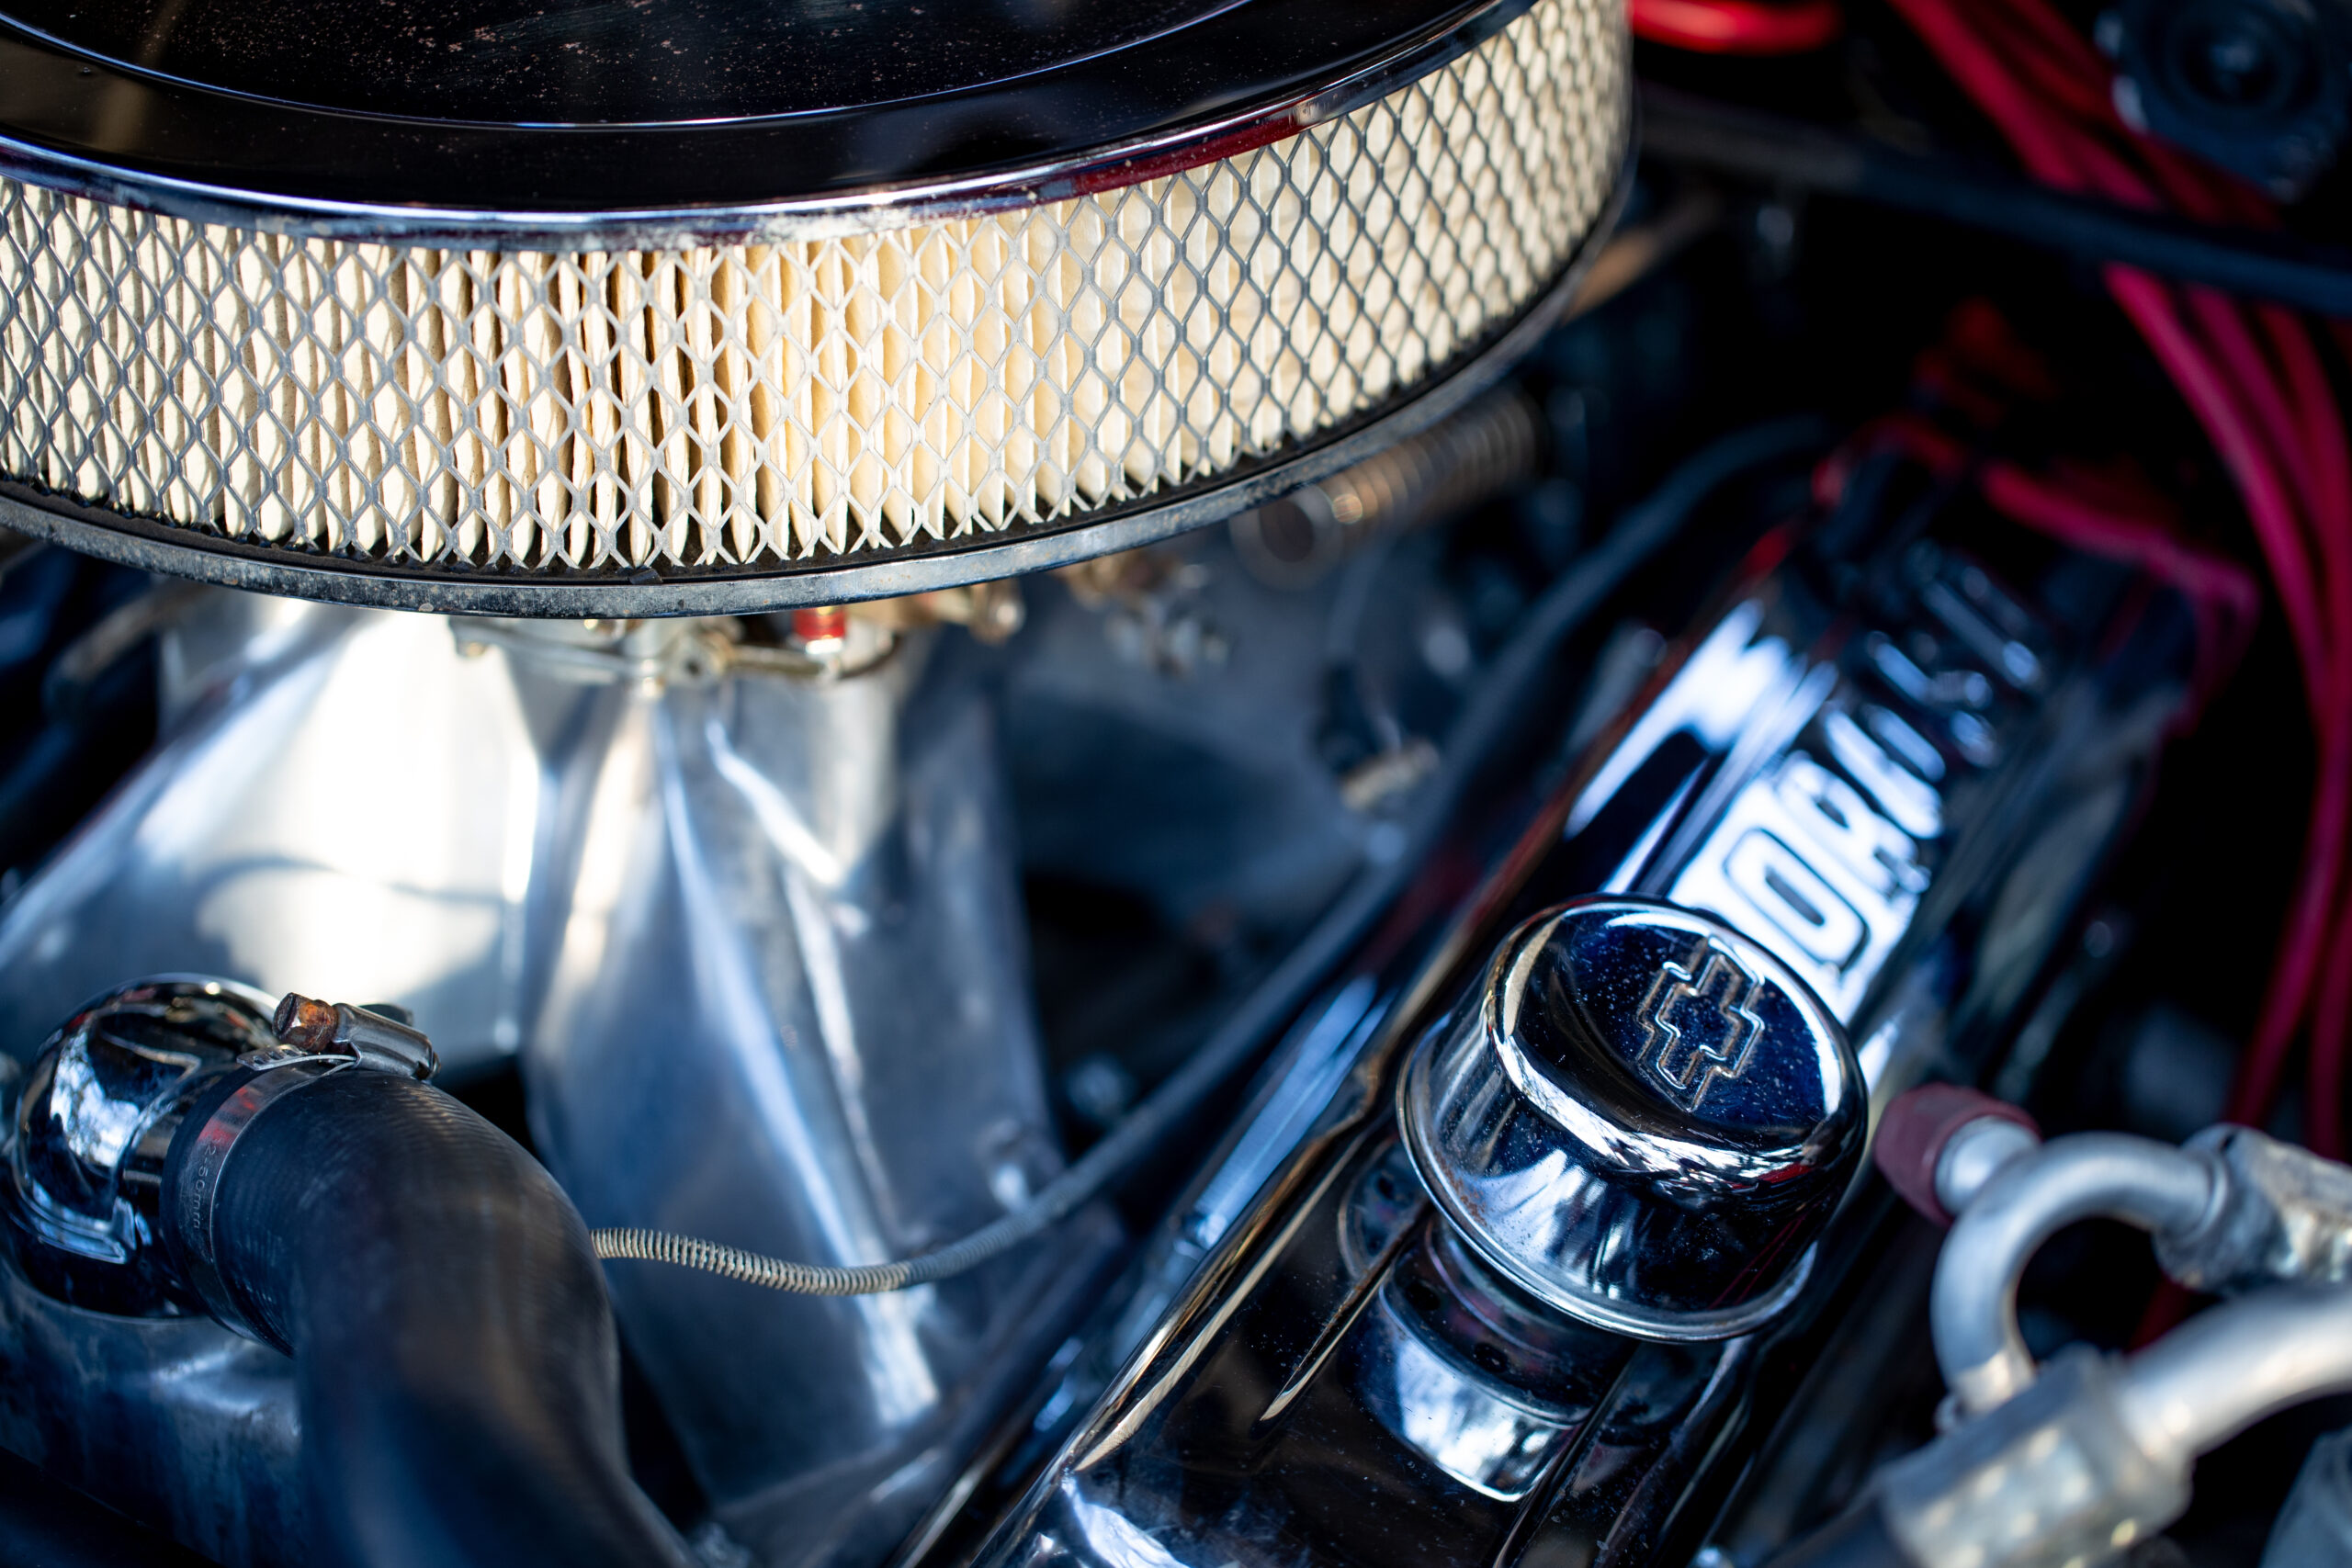 Close-up of a car engine, highlighting the air filter and chrome valve cover. The Chevrolet emblem is visible on the valve cover.